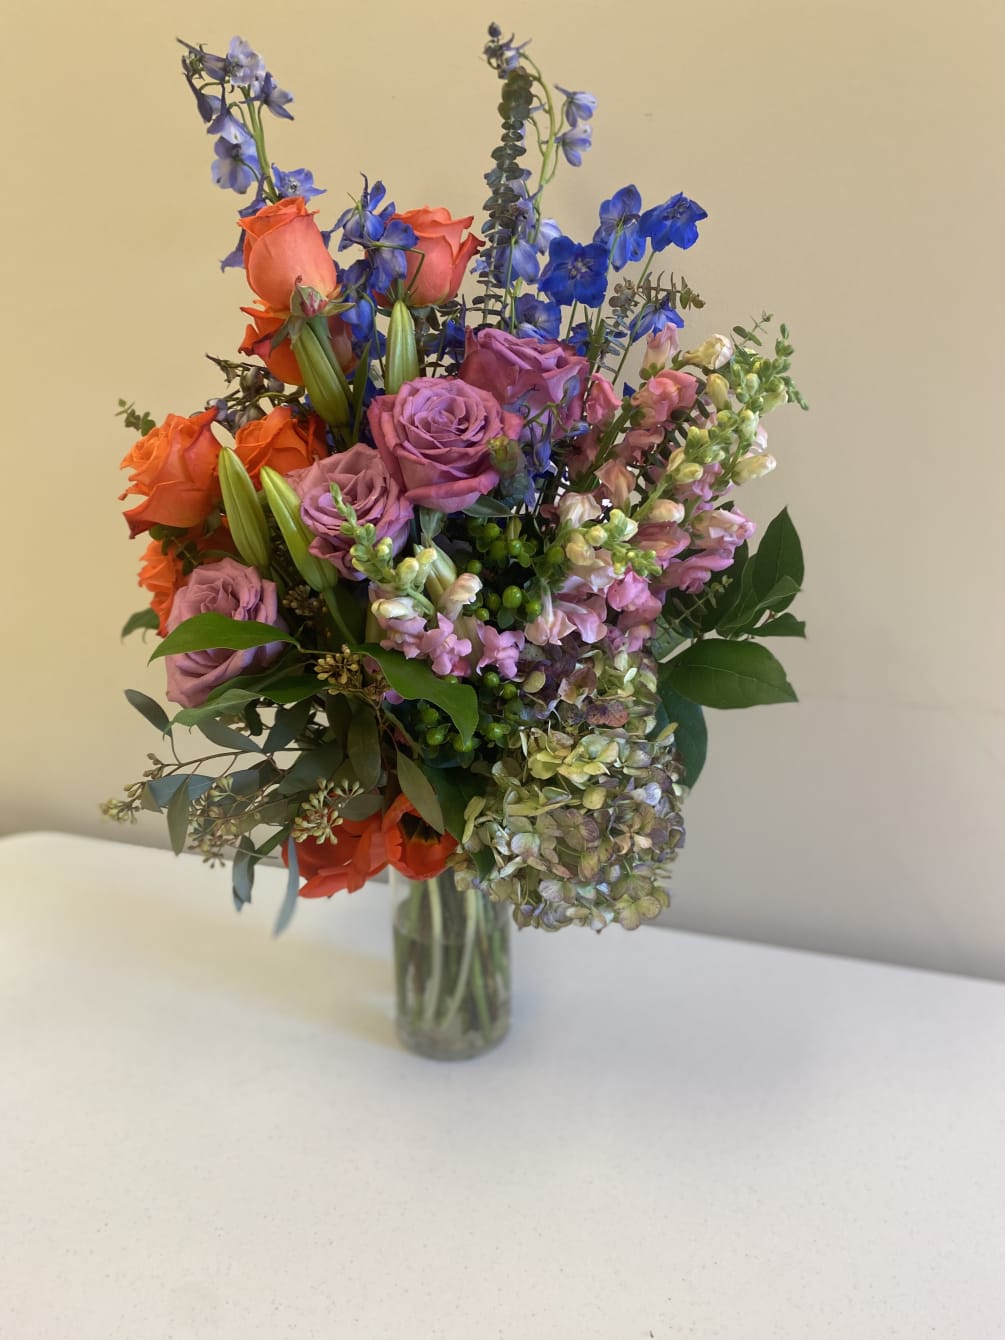 Hand a garden to your loved one is style with colorful luscious